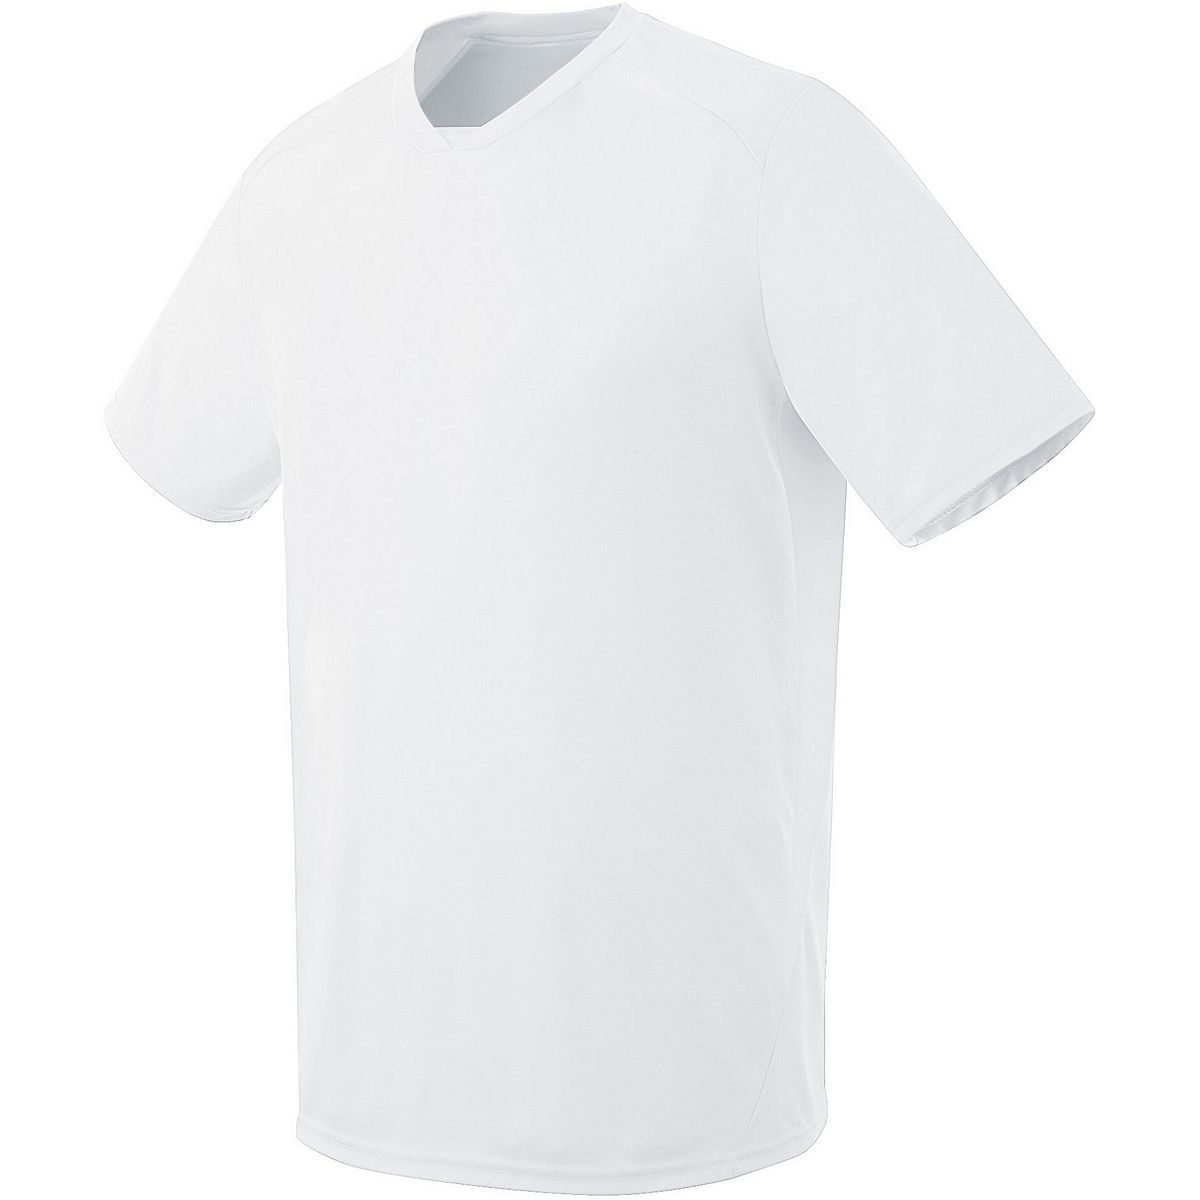 High 5 Youth Hawk Jersey in White/White  -Part of the Youth, Youth-Jersey, High5-Products, Soccer, Shirts, All-Sports-1 product lines at KanaleyCreations.com